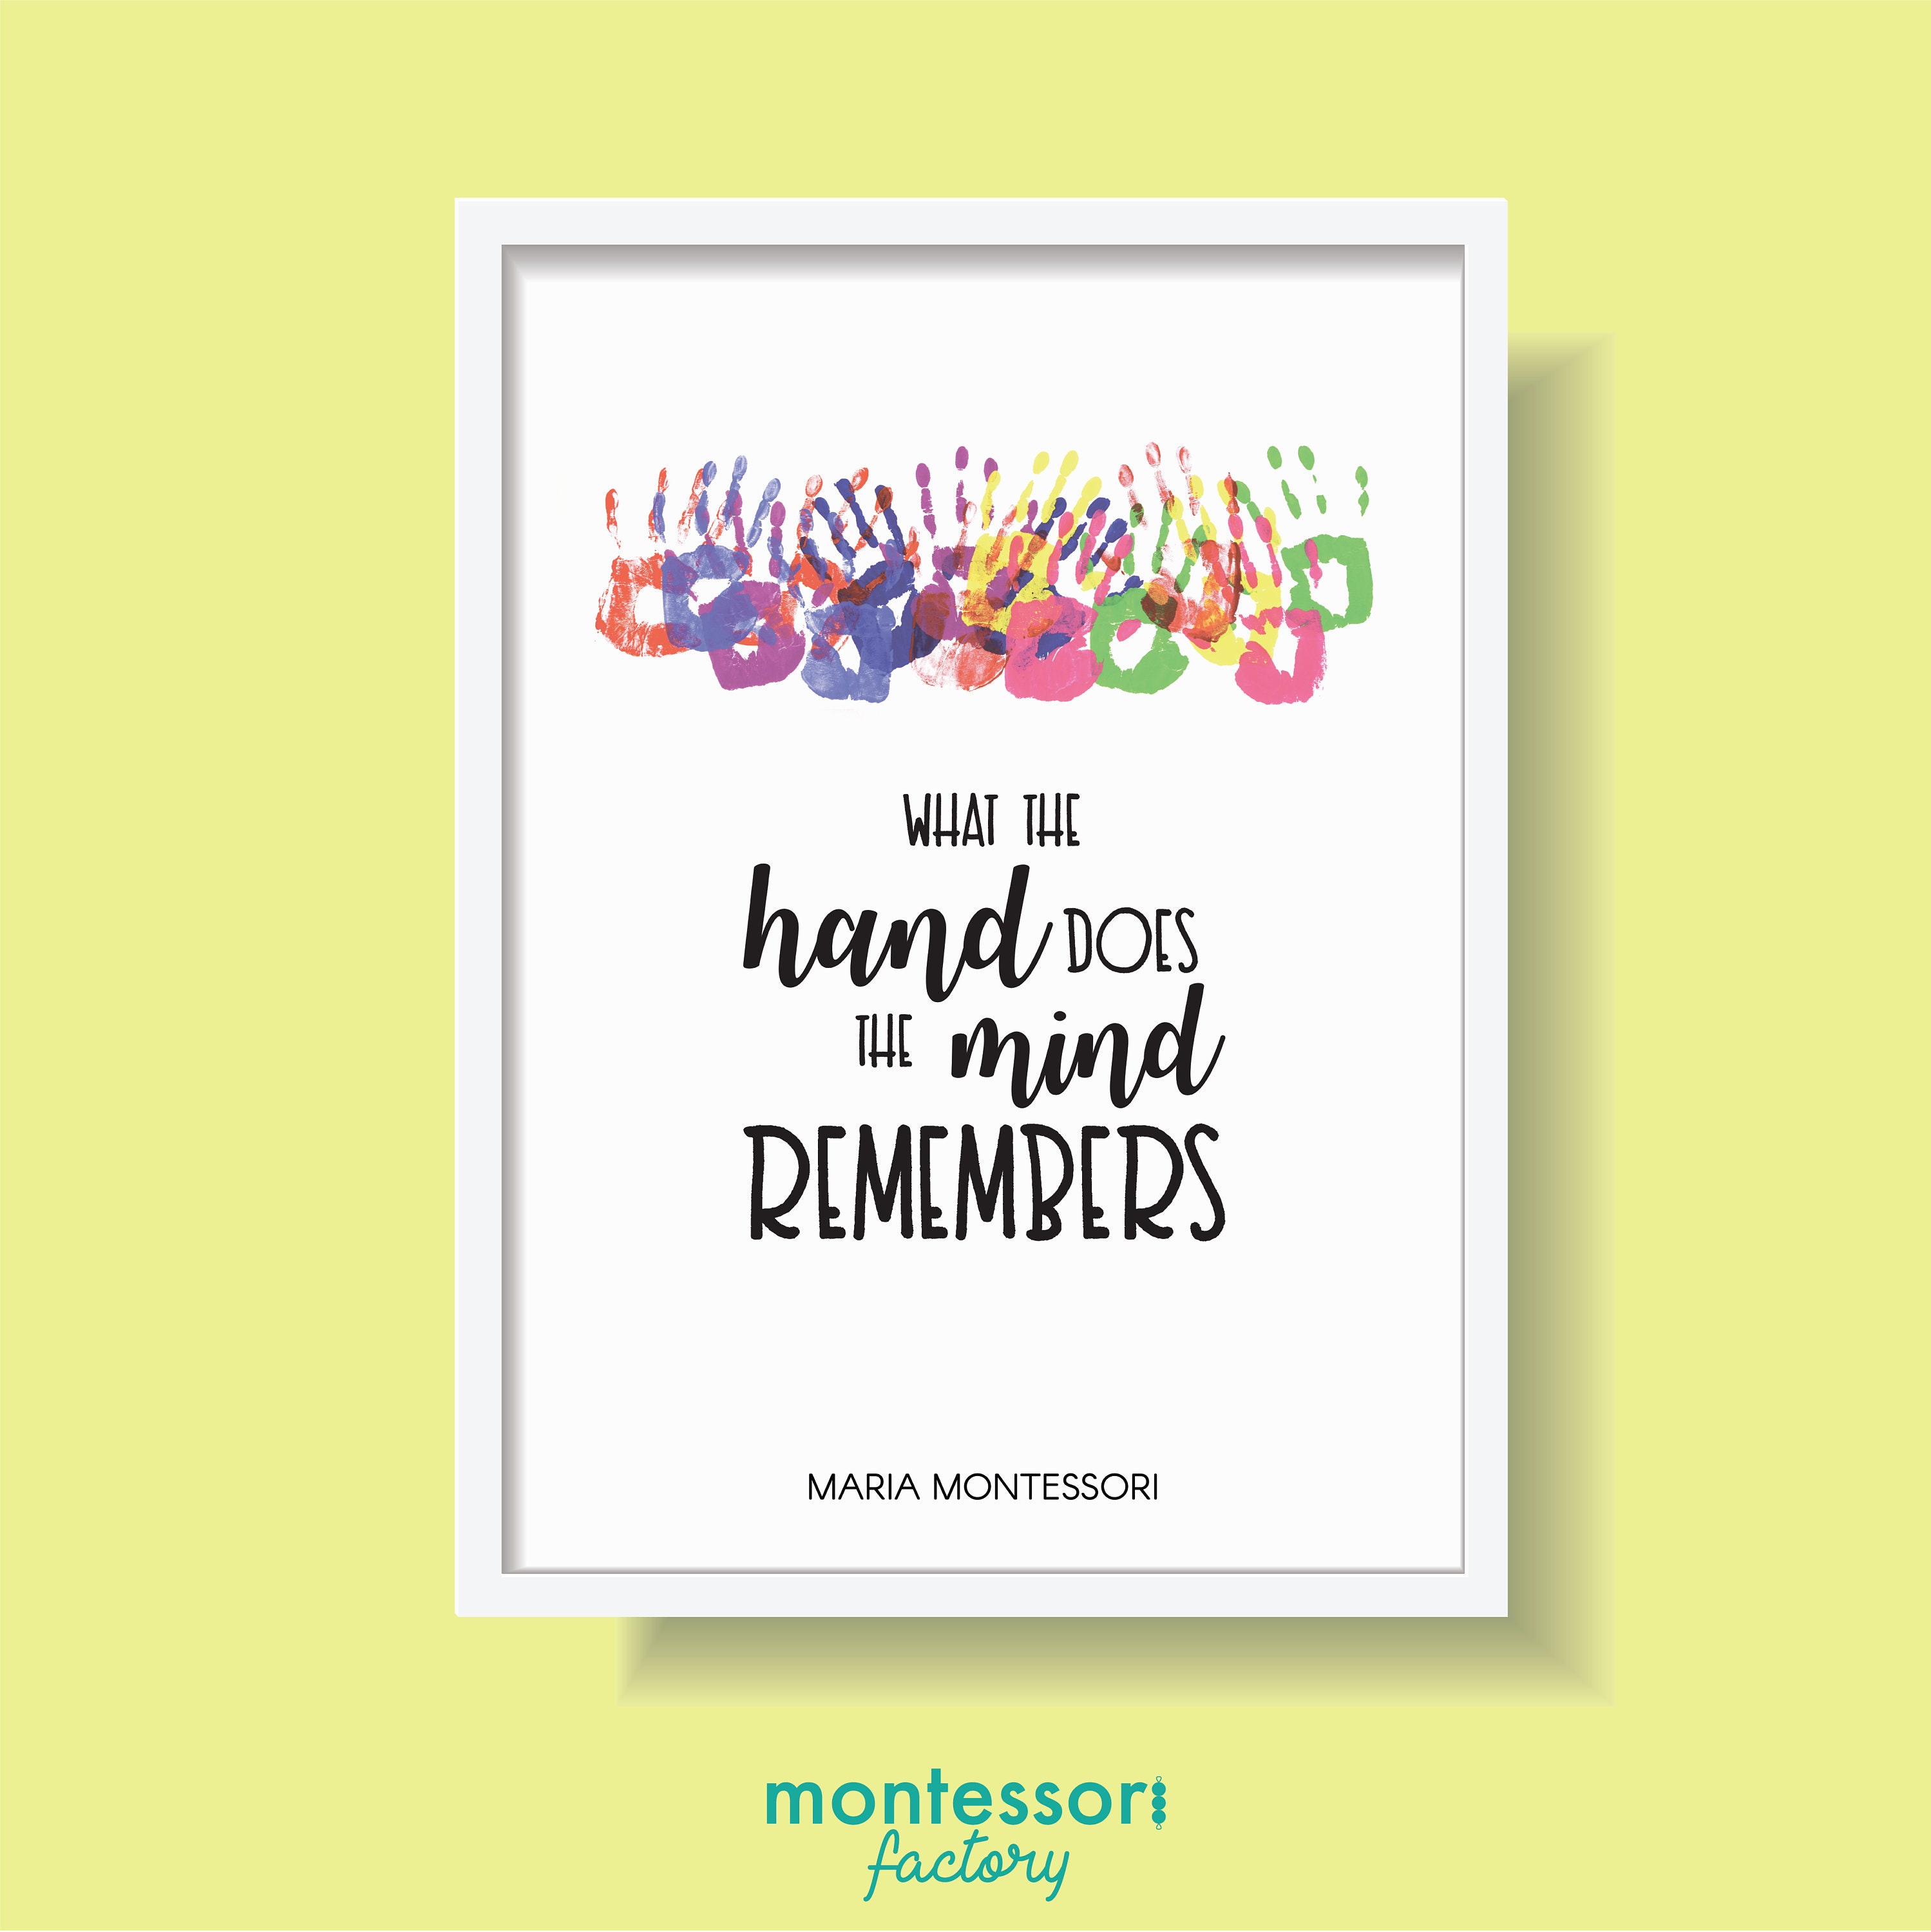 Montessori Educational MIND Kindergarten Quote Primary the Poster Learning Does - Wall Maria Art Etsy What HAND the Chart REMEMBERS Kids Printable